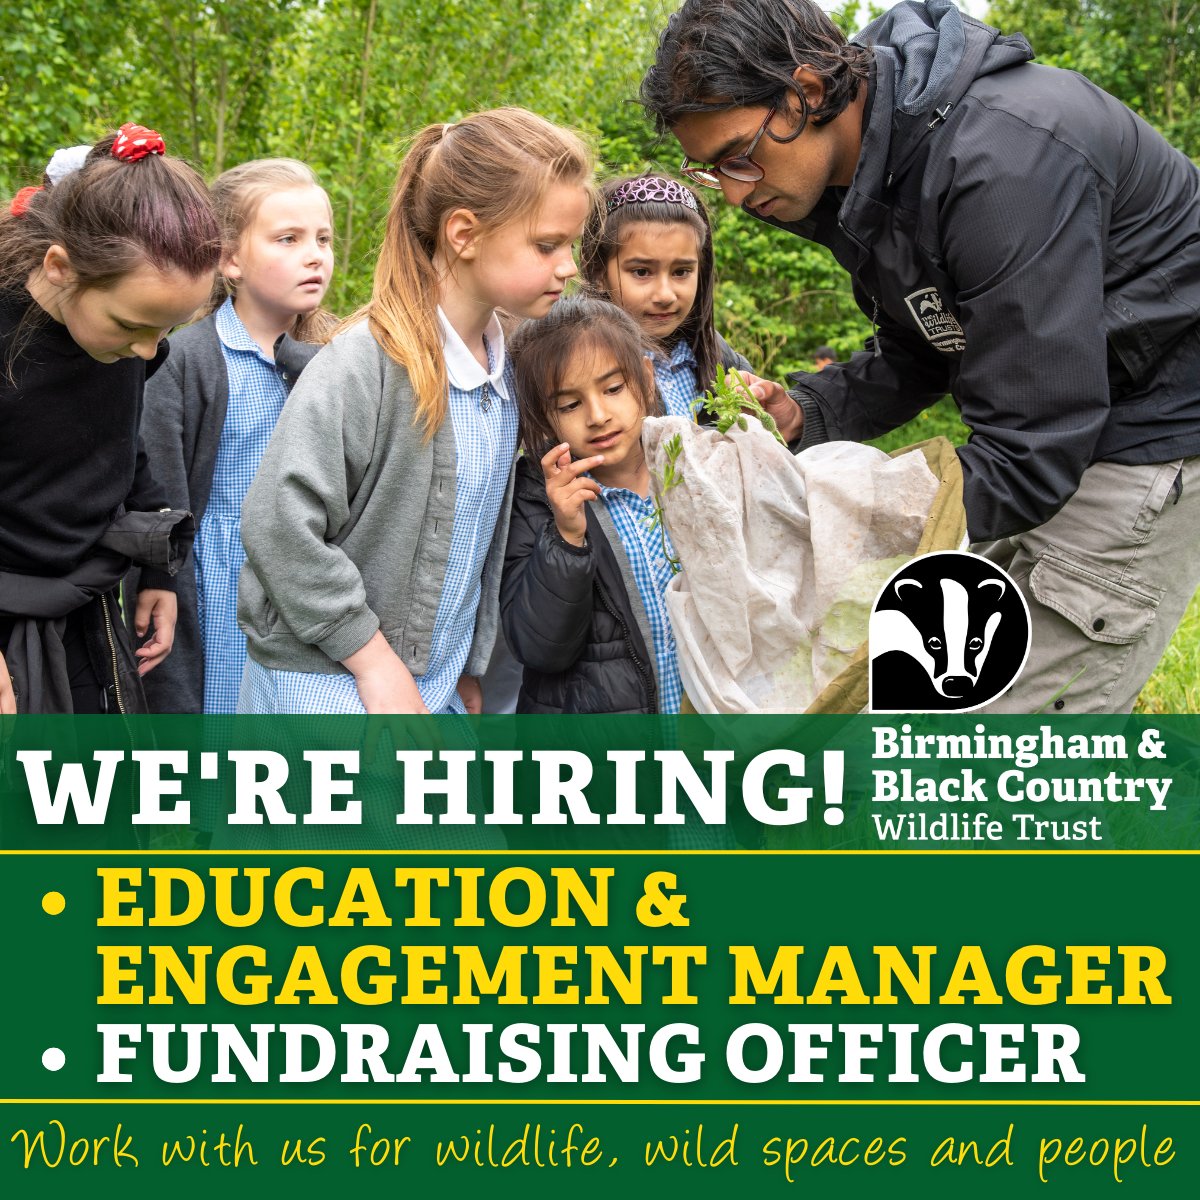 🌳2 days left to apply!🌳 We're currently looking for an Education & Engagement Manager and a Fundraising Officer to support our work for wildlife, wild spaces and people. Can you help us build a wilder Birmingham and Black Country? Apply by 03rd May: bbcwildlife.livevacancies.co.uk